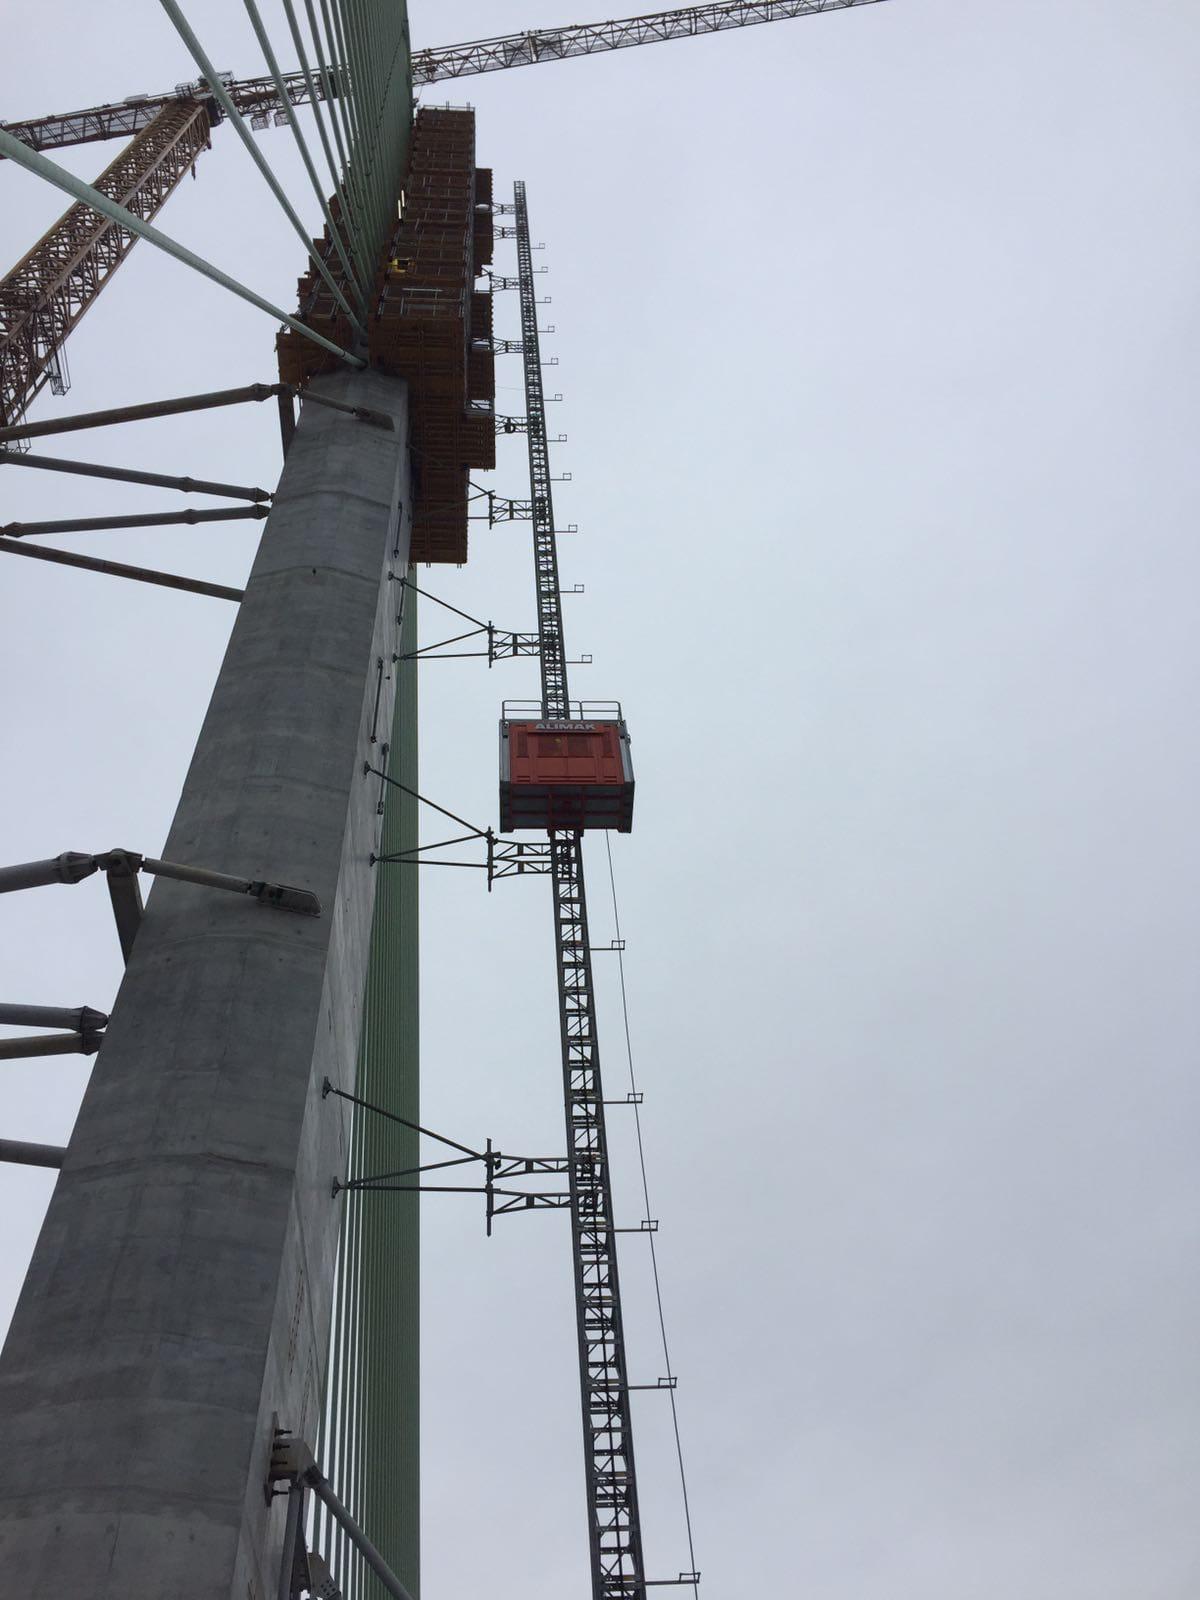 One of the Tower lifts